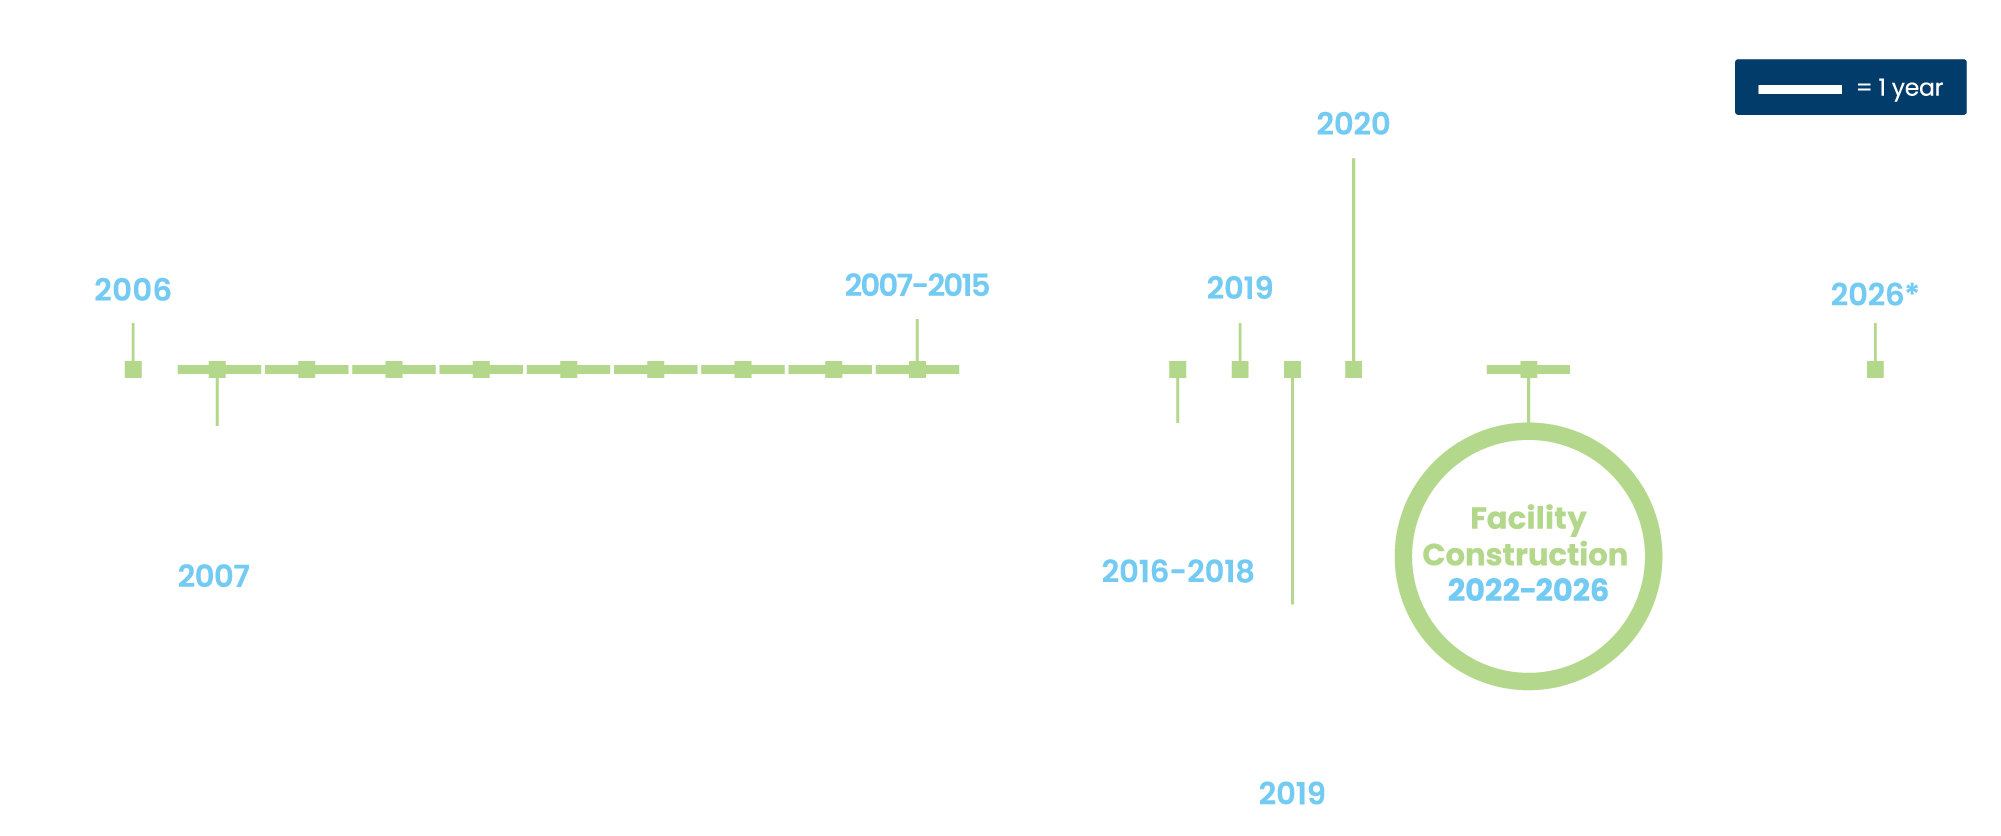 The project planning timeline starting in 2006 and extending into 2026. Feasibility and Preliminary Planning Study in 2006. Wastewater Treatment Plan Expansion Plan in 2007. Environmental Impact Statements Process from 2007 to 2015. Preliminary Engineering Report from 2016 to 2018. NPDES Permit issued in 2019. Facility renamed to honor Jospeh C. Stowe Jr. in 2019. Design-Build Team Selected in 2020. Facility Construction from 2022 to 2026. Facility Opens in 2026.